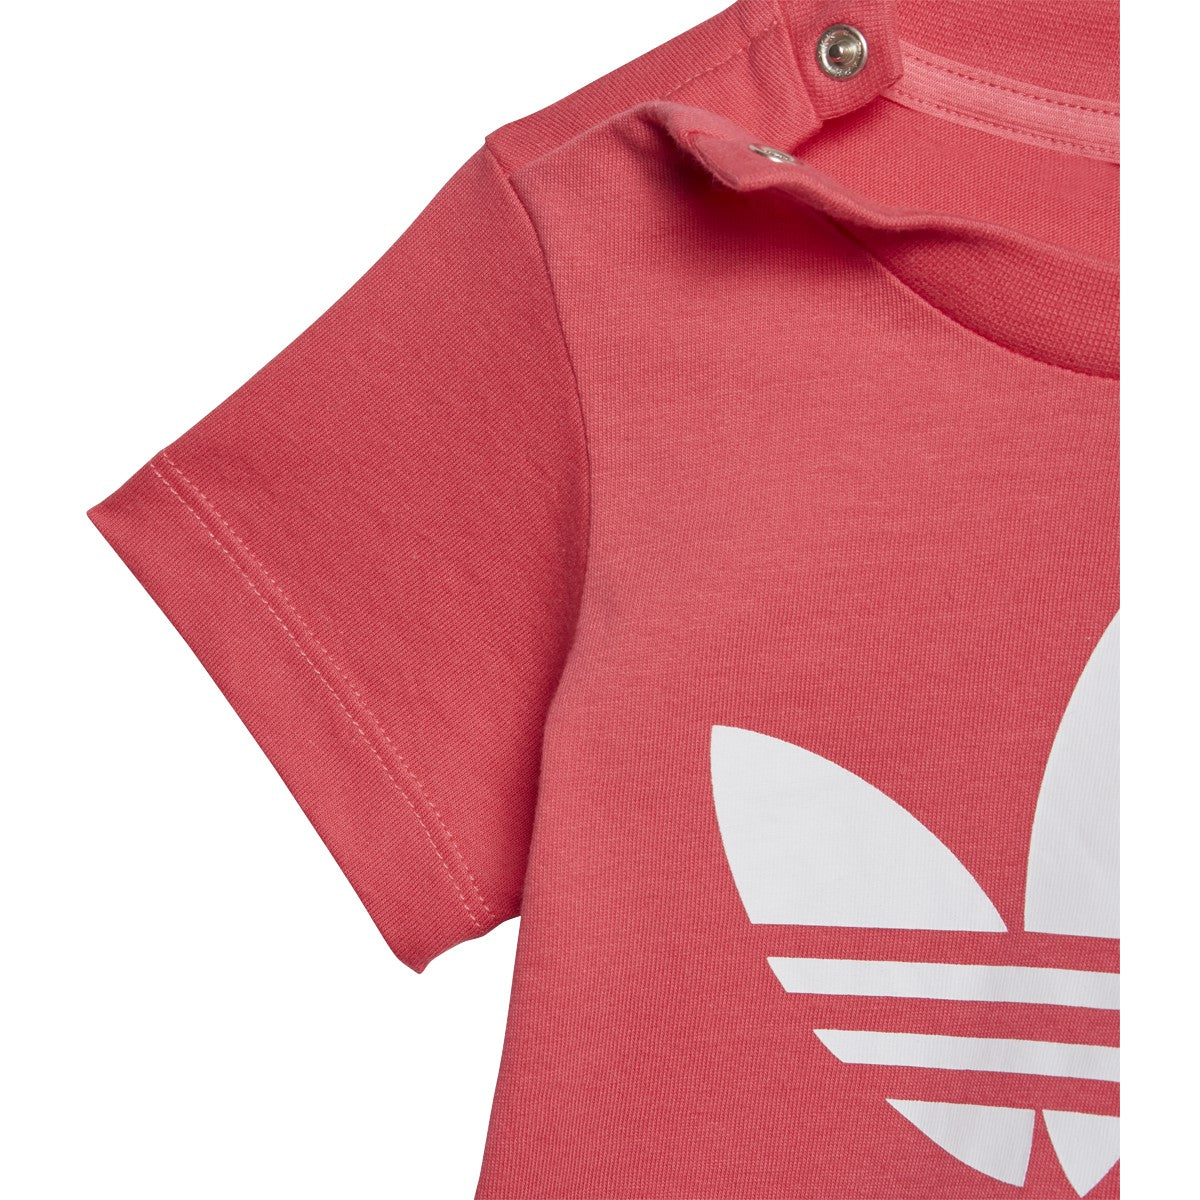 Adidas Trefoil Infants Tee Pink-White Real